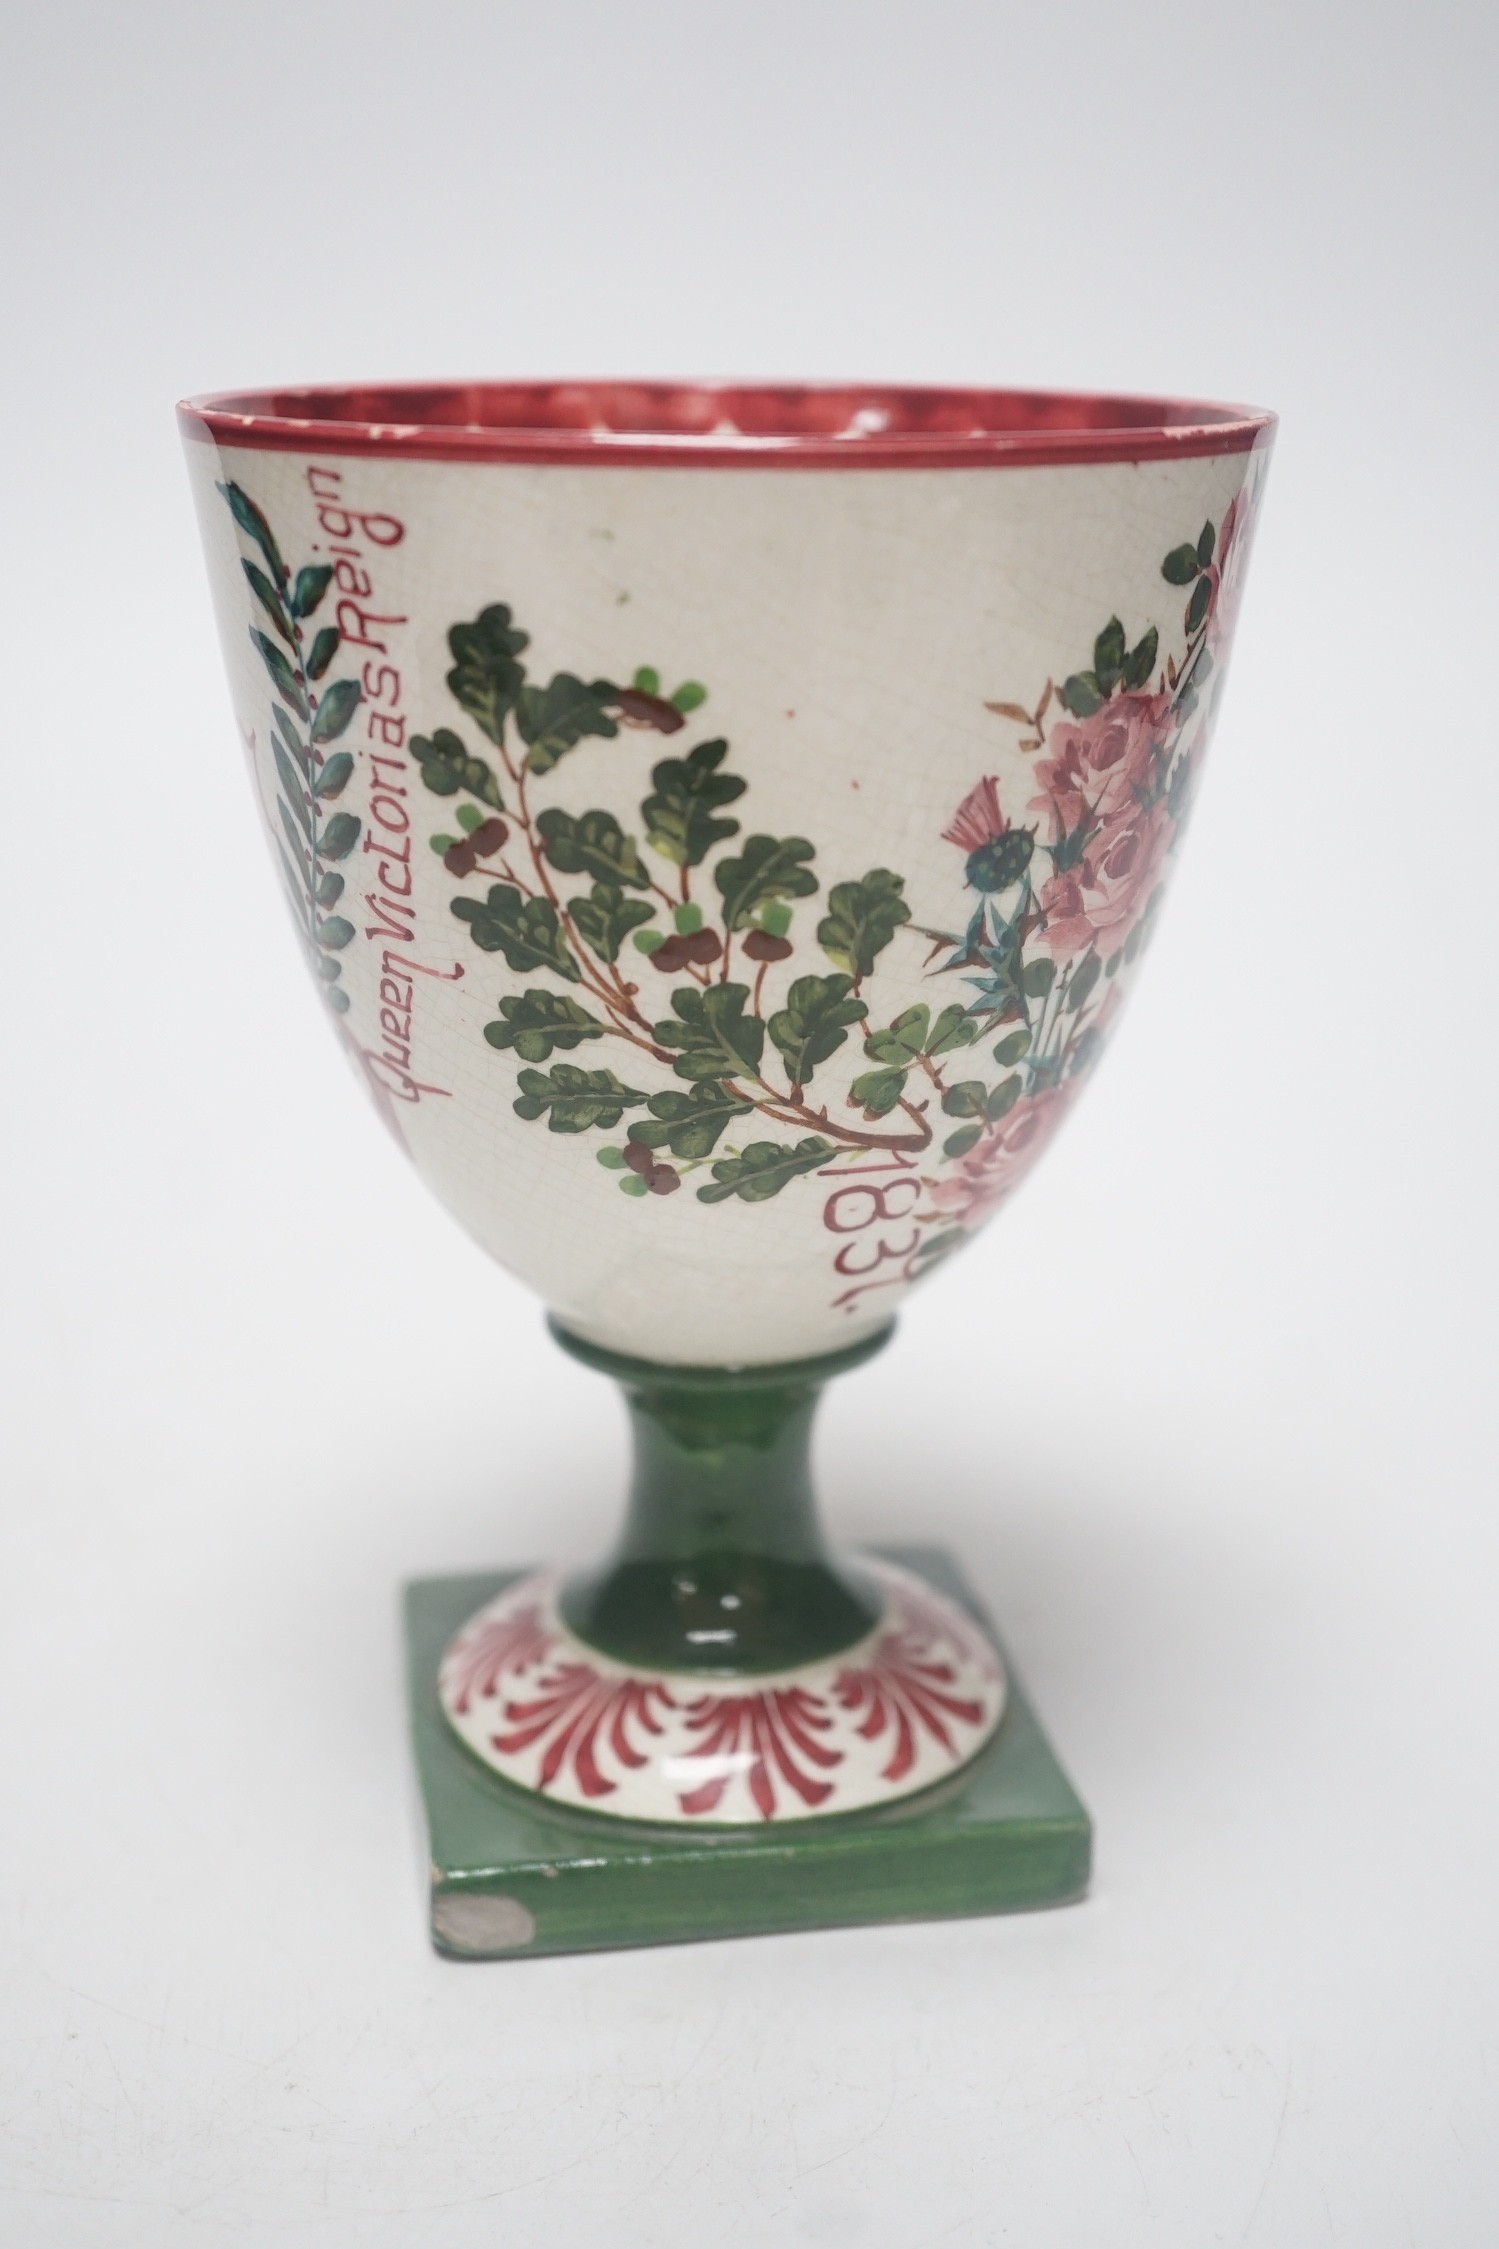 A Wemyss Queen Victoria Diamond jubilee commemorative goblet, 1897, retailed by T.Goode and Co., - Image 4 of 7